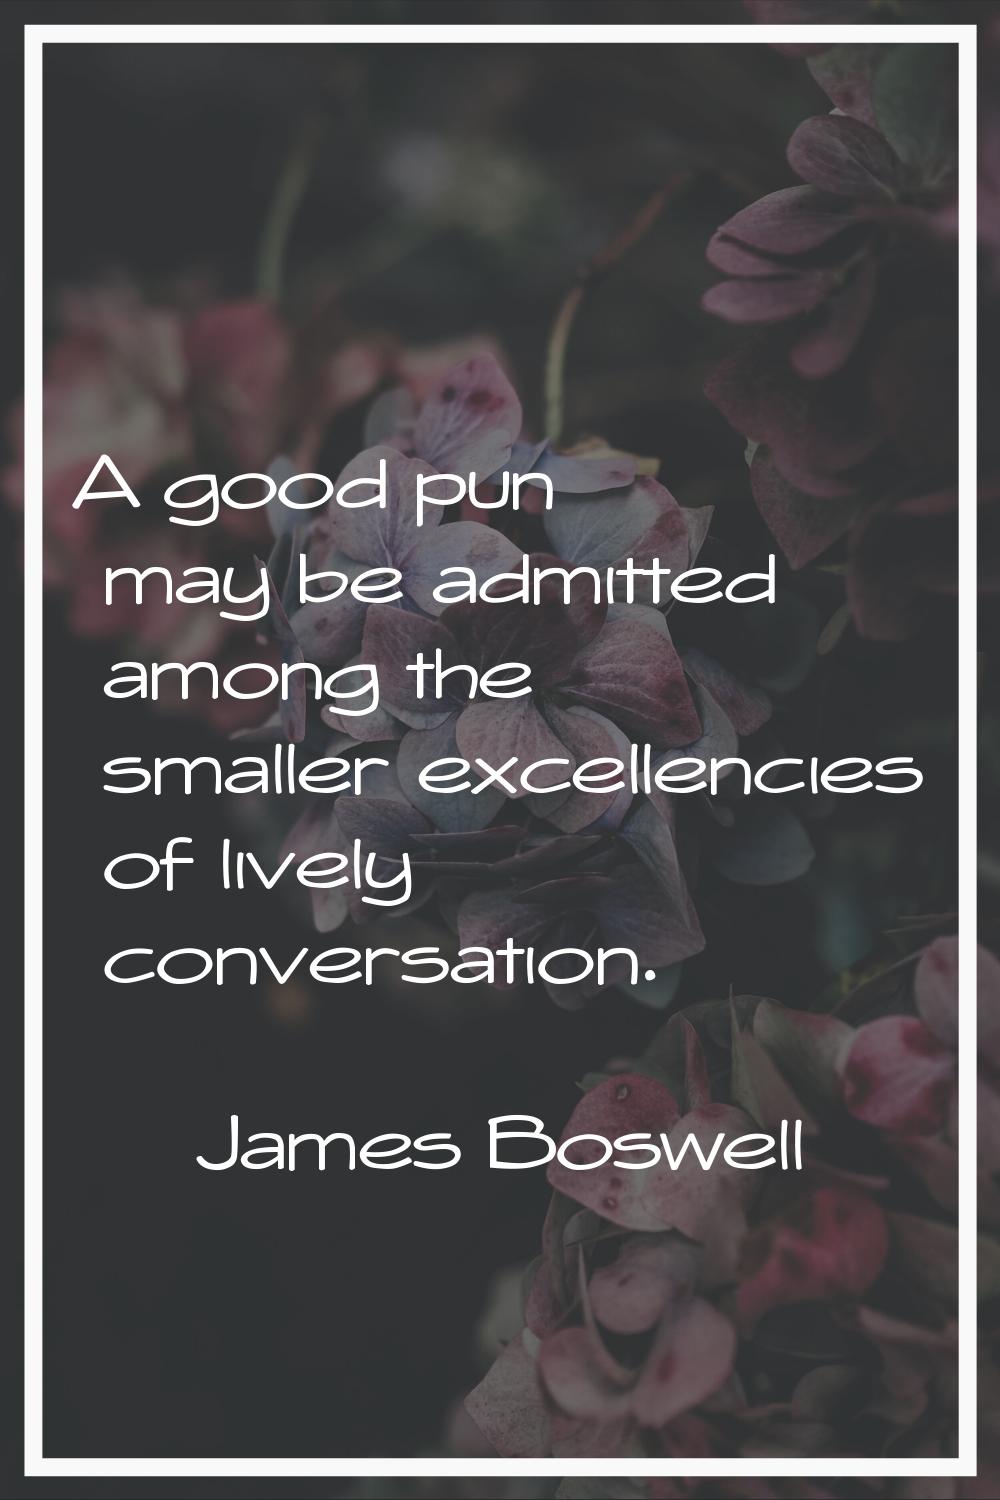 A good pun may be admitted among the smaller excellencies of lively conversation.